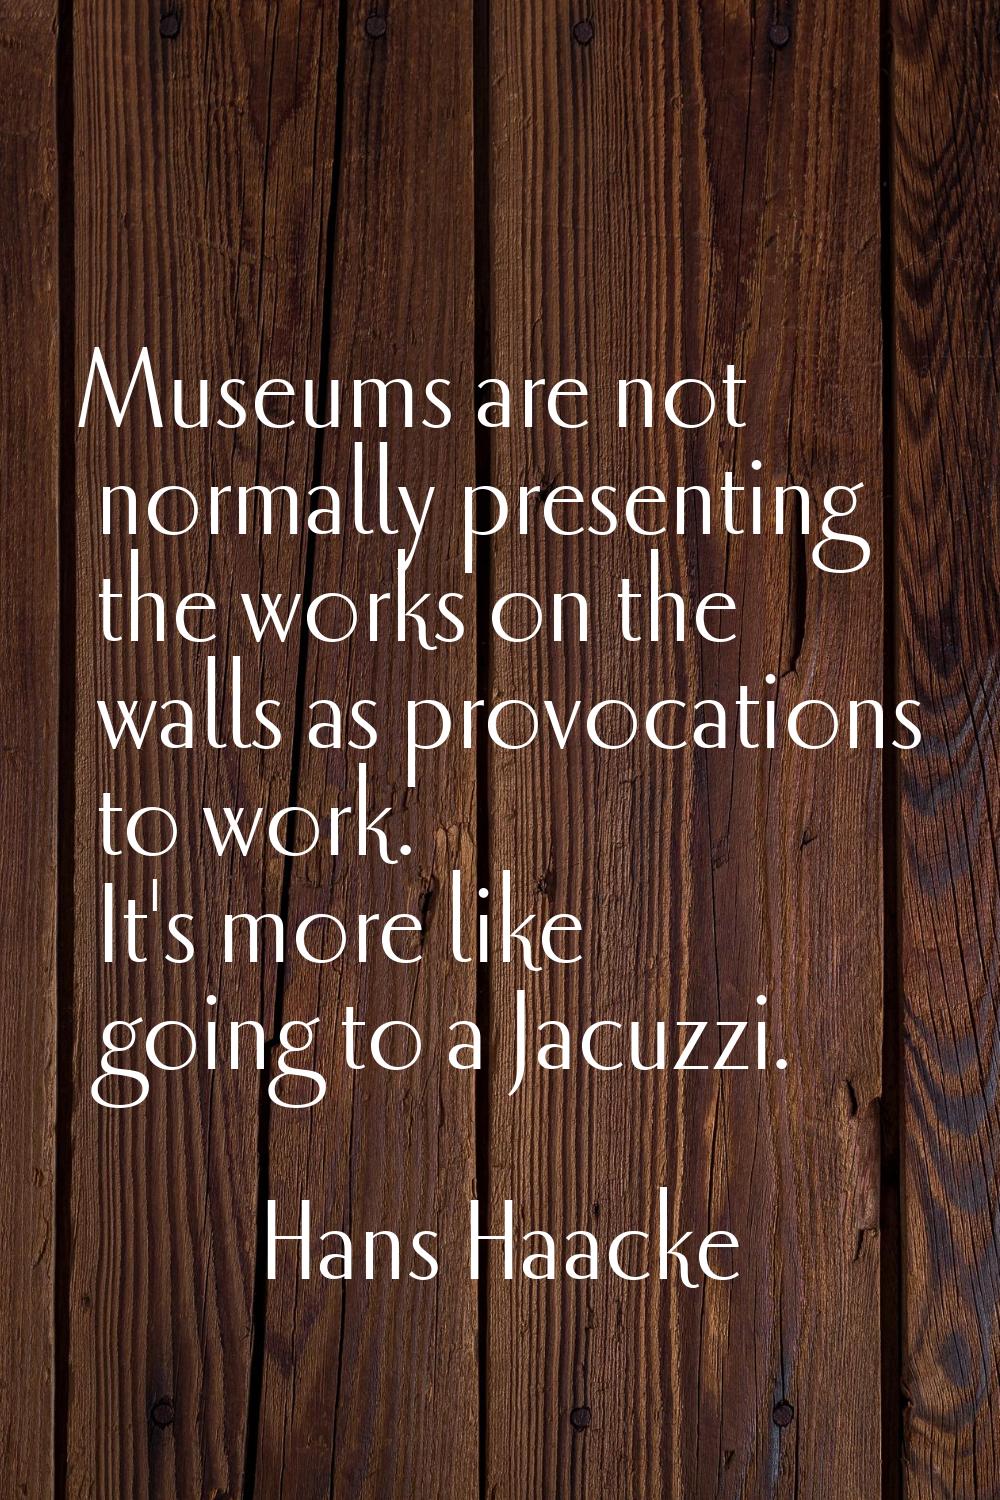 Museums are not normally presenting the works on the walls as provocations to work. It's more like 